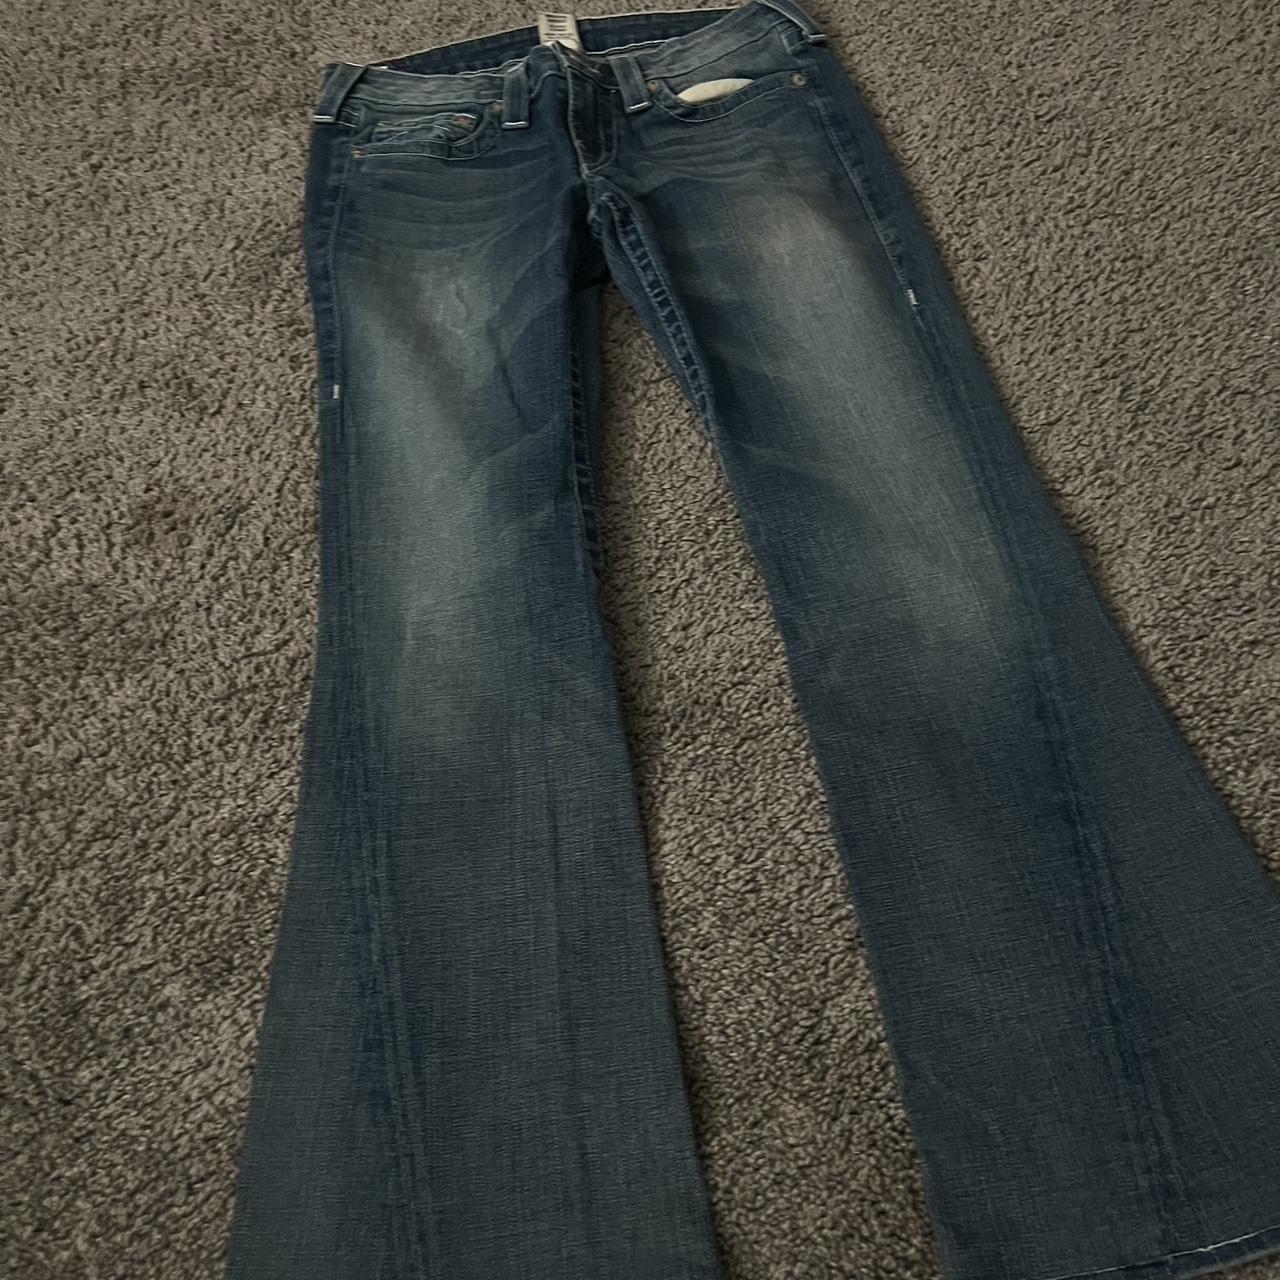 cool true religions jeans flared dm before buying,... - Depop